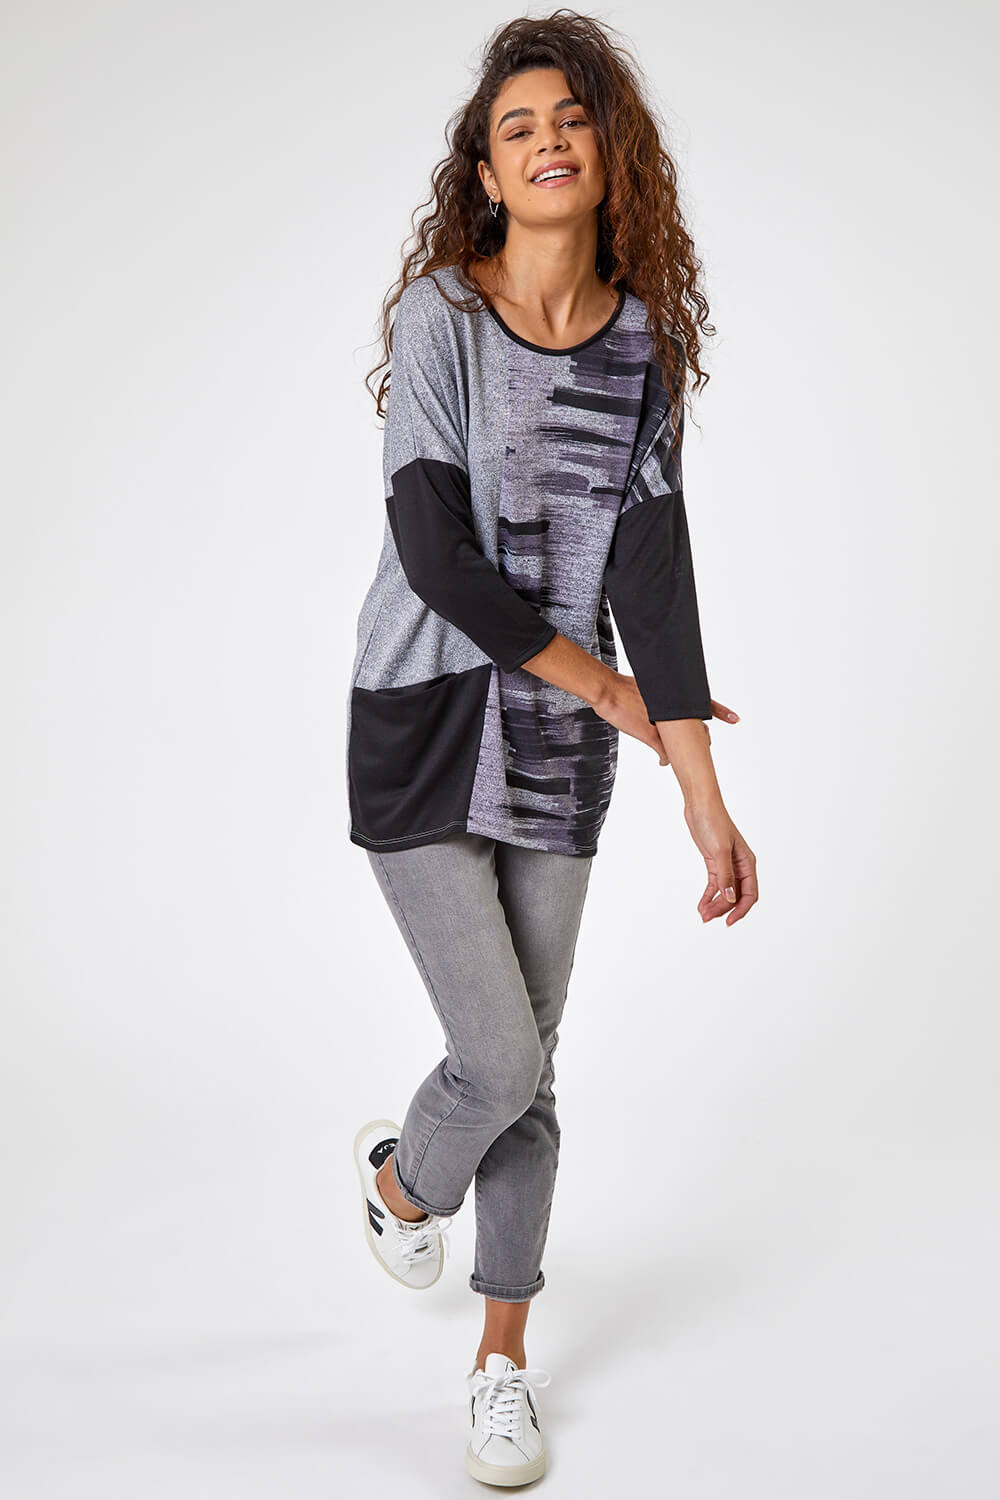 Grey Colour Block Graphic Print Tunic Top, Image 3 of 5